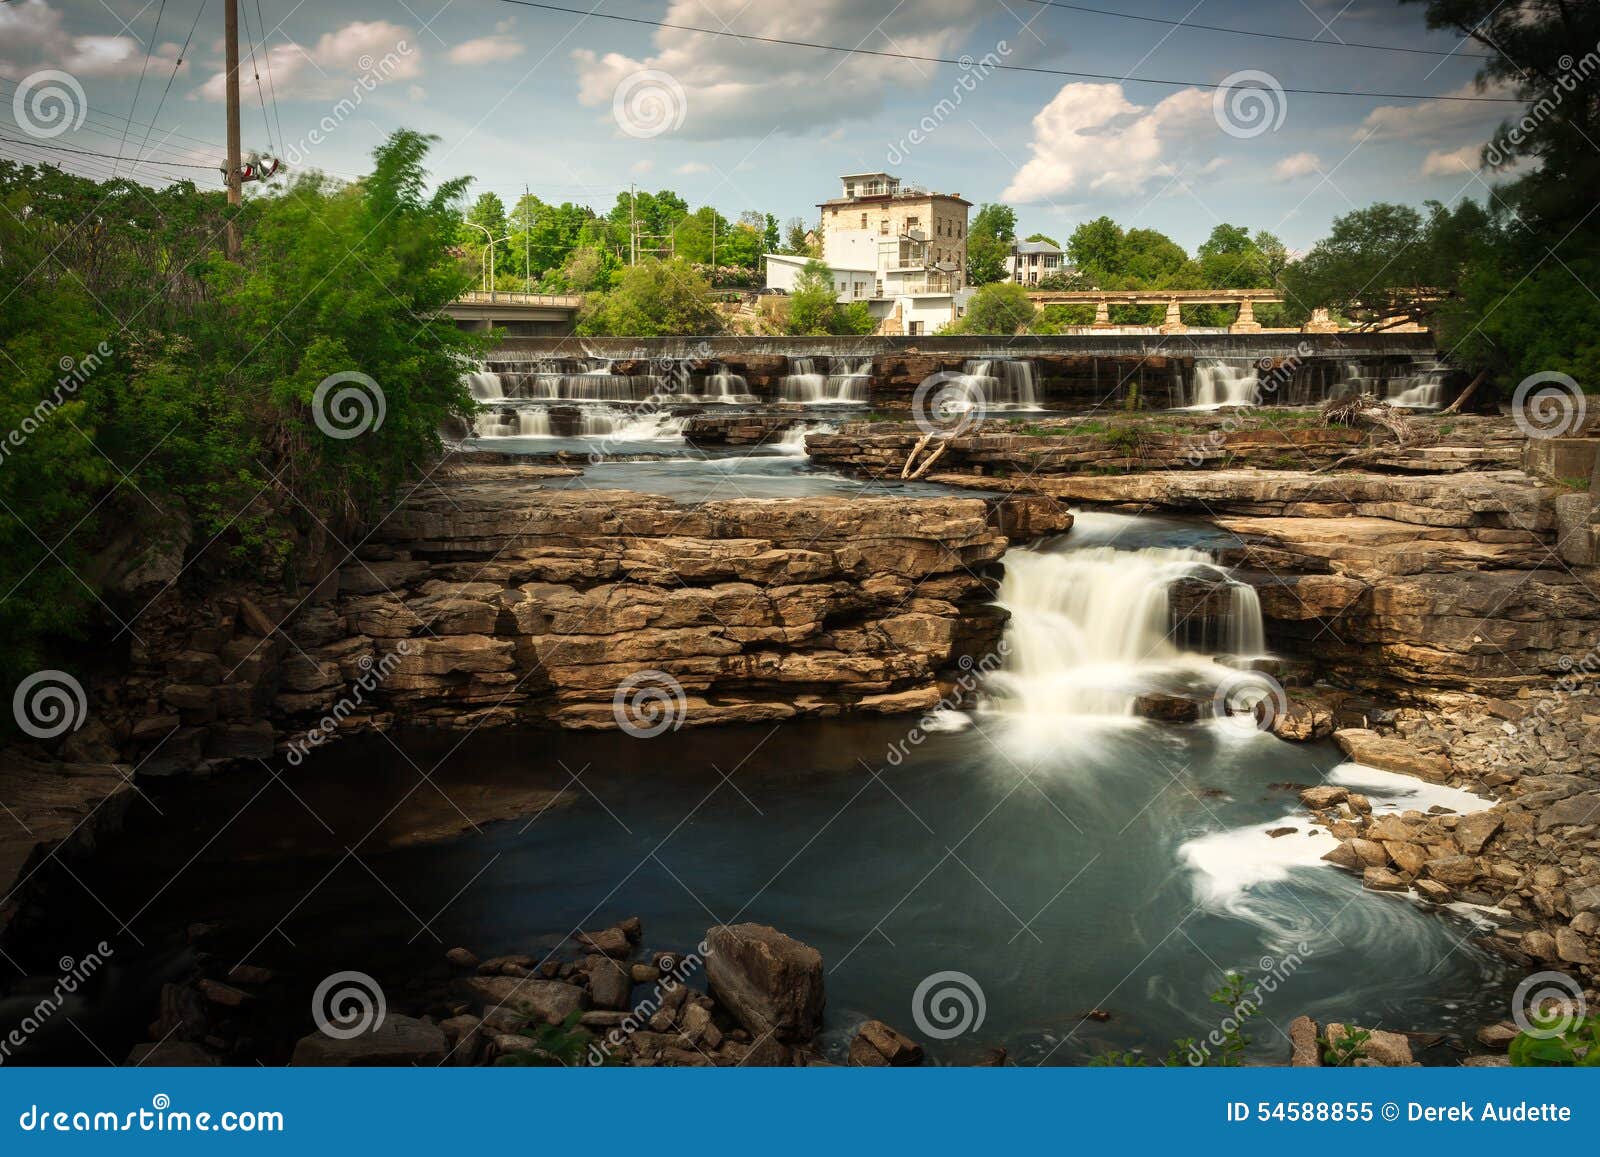 many small waterfalls in almonte, ontario canada